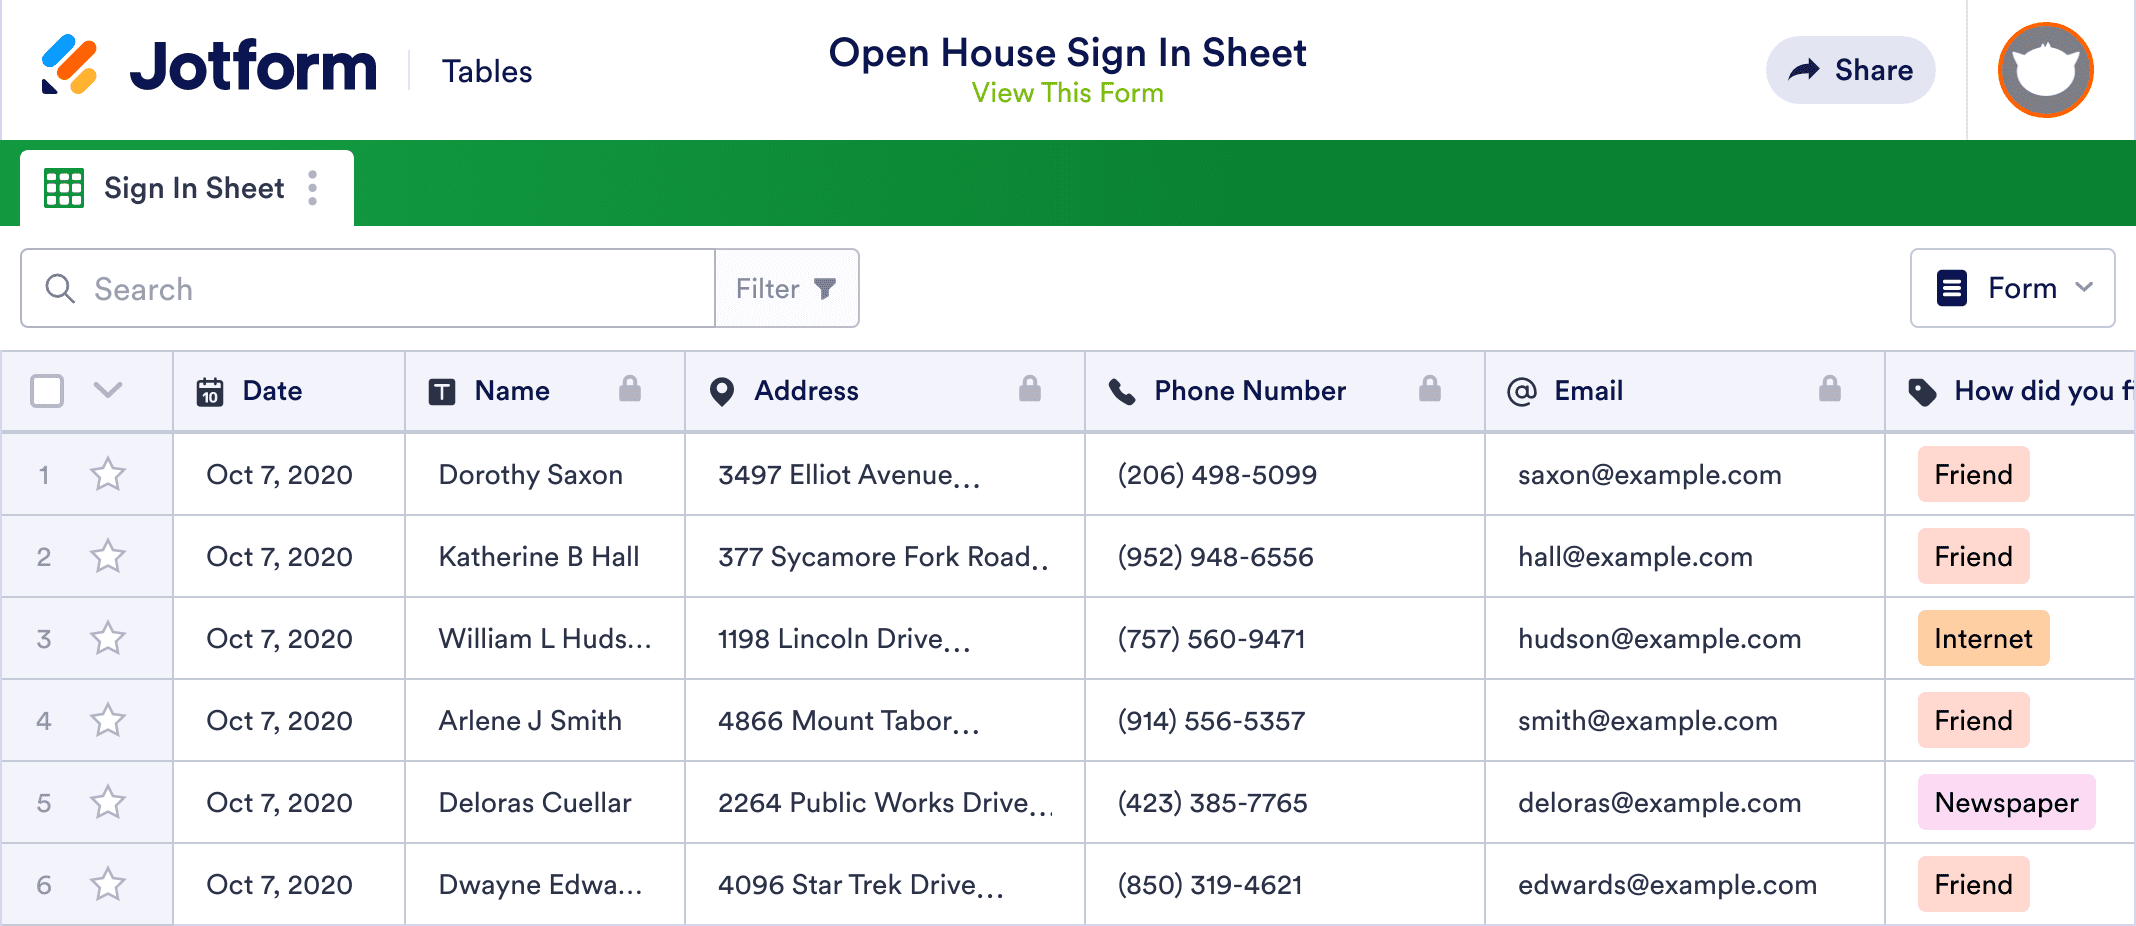 Open House Sign In Sheet